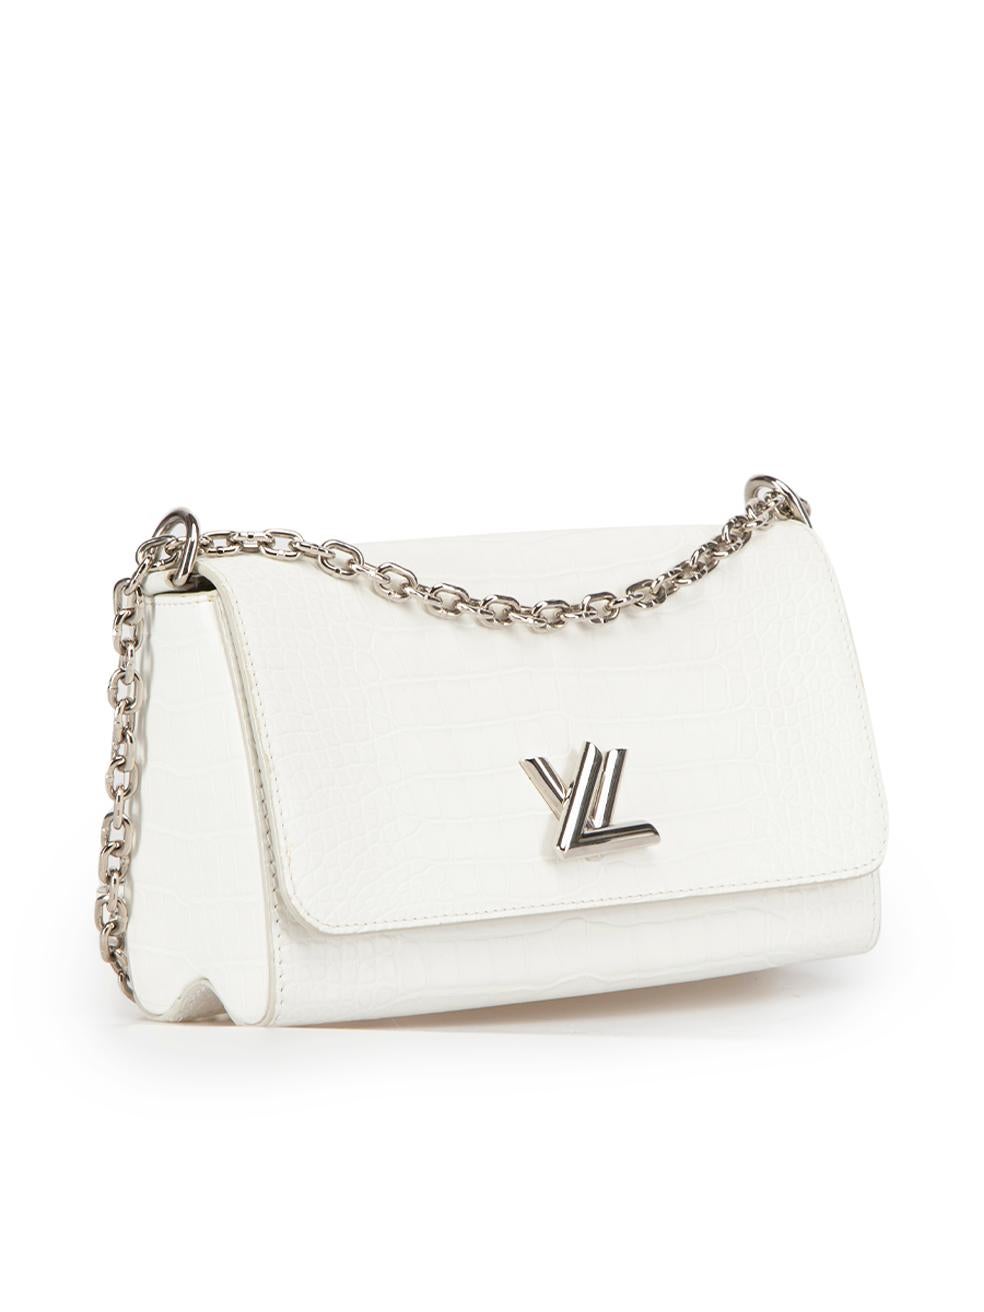 CONDITION is Very good. Minimal wear to bag is evident. Minimal wear to the front-right with discoloured mark on this used Louis Vuitton designer resale item.



Details


White

Crocodile leather

Mini shoulder bag

Two ways chai and leather